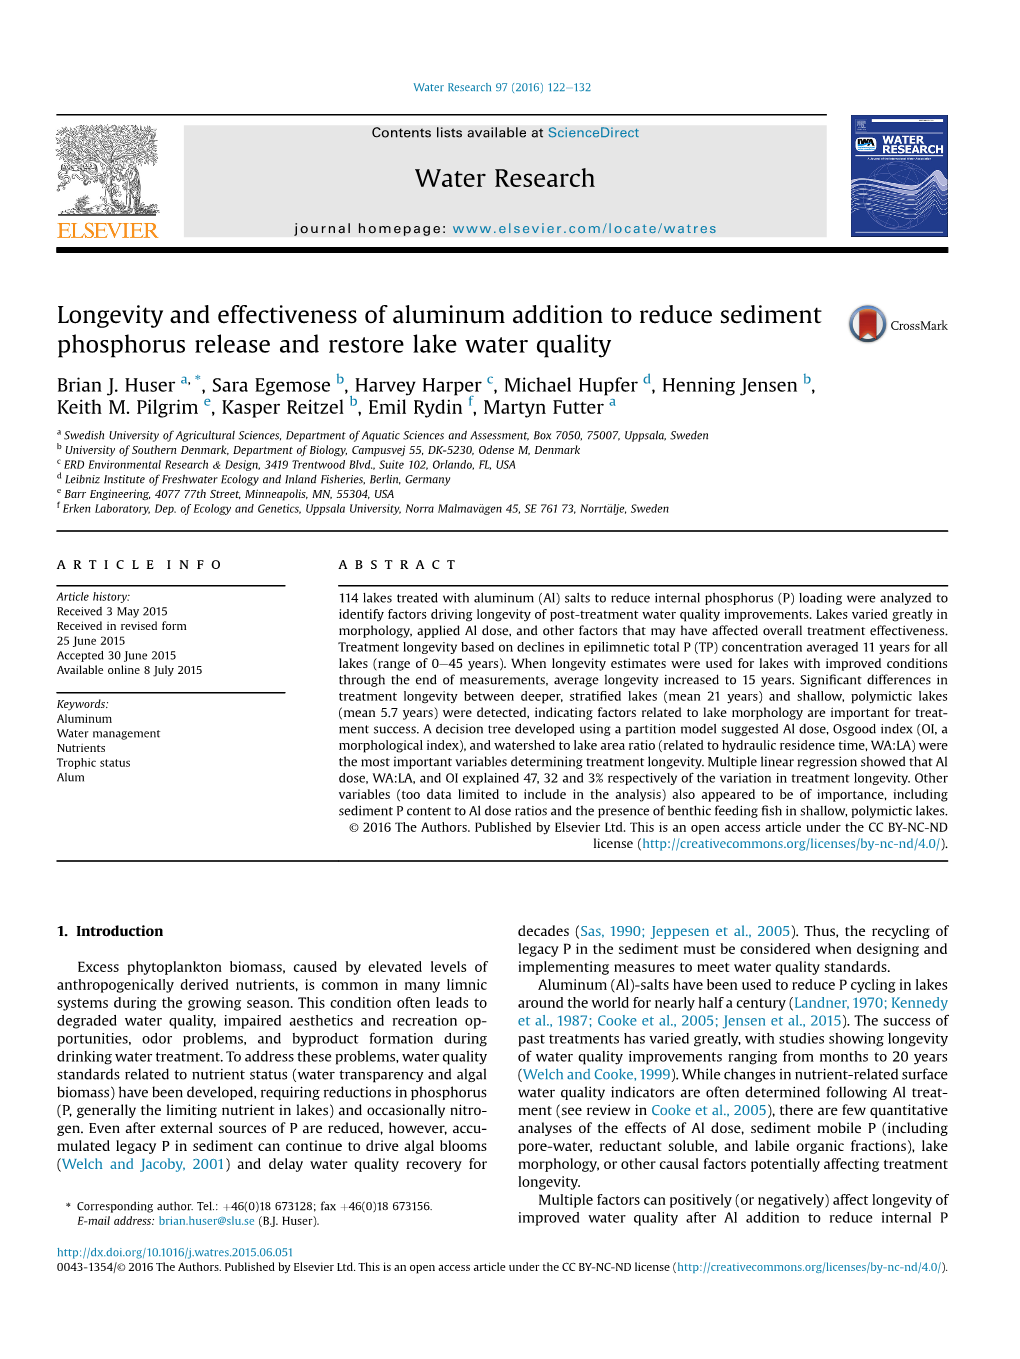 Longevity and Effectiveness of Aluminum Addition to Reduce Sediment Phosphorus Release and Restore Lake Water Quality